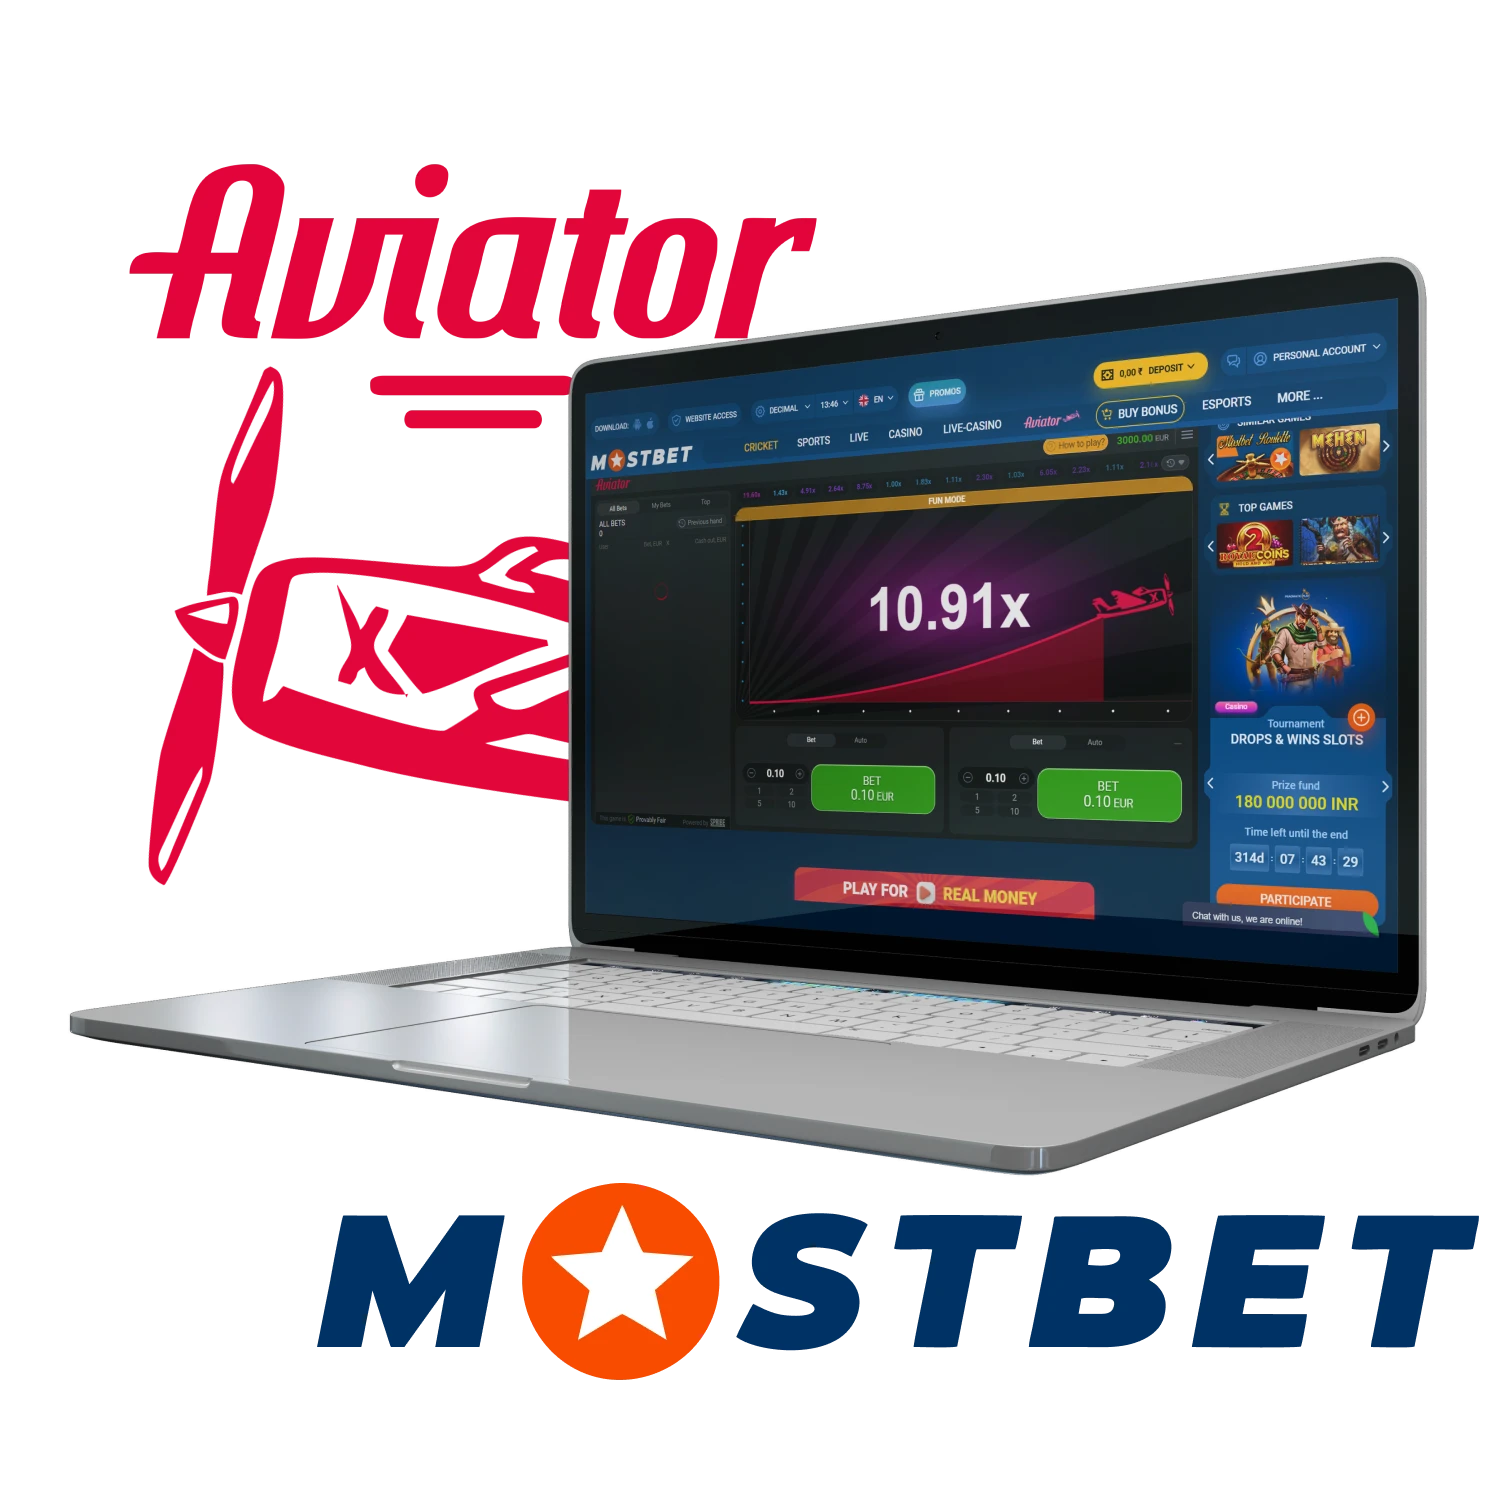 Learn how to play Aviator on the Mostbet website.